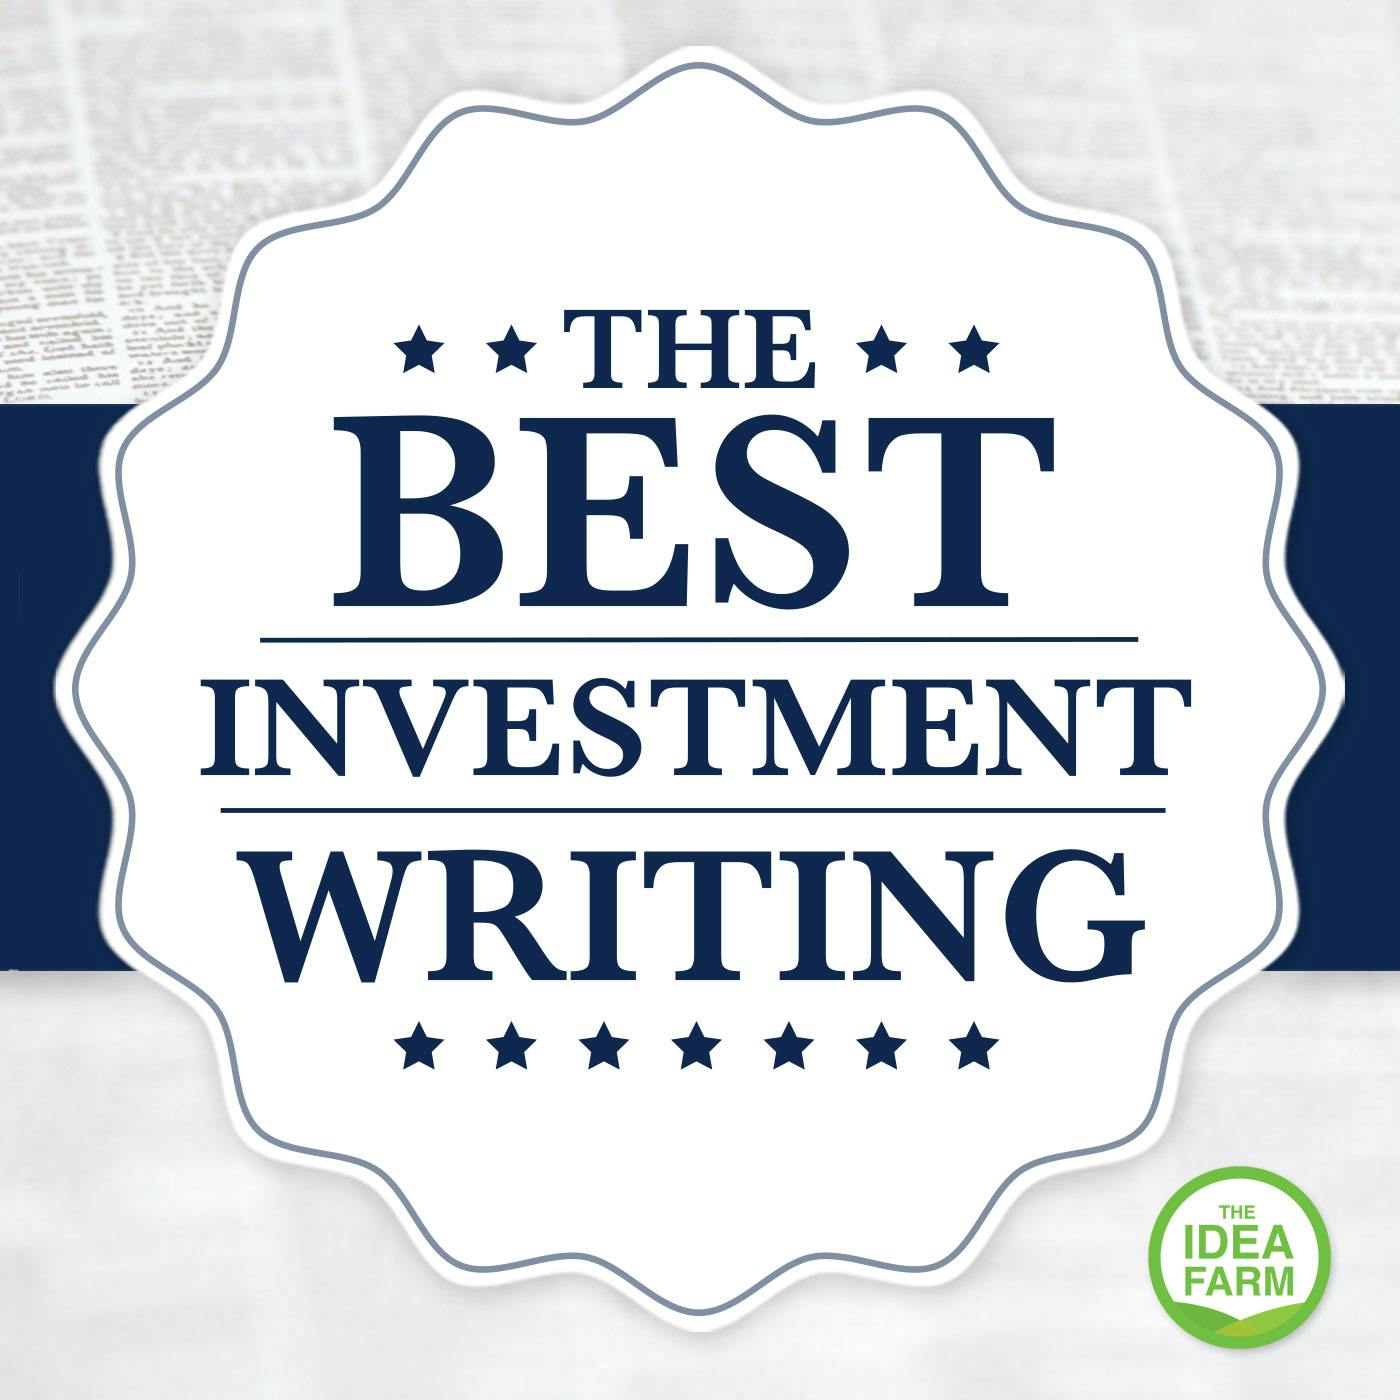 The Best Investment Writing Volume 5: Sean Duffin, Cambridge Associates – Benefits of Global Diversification